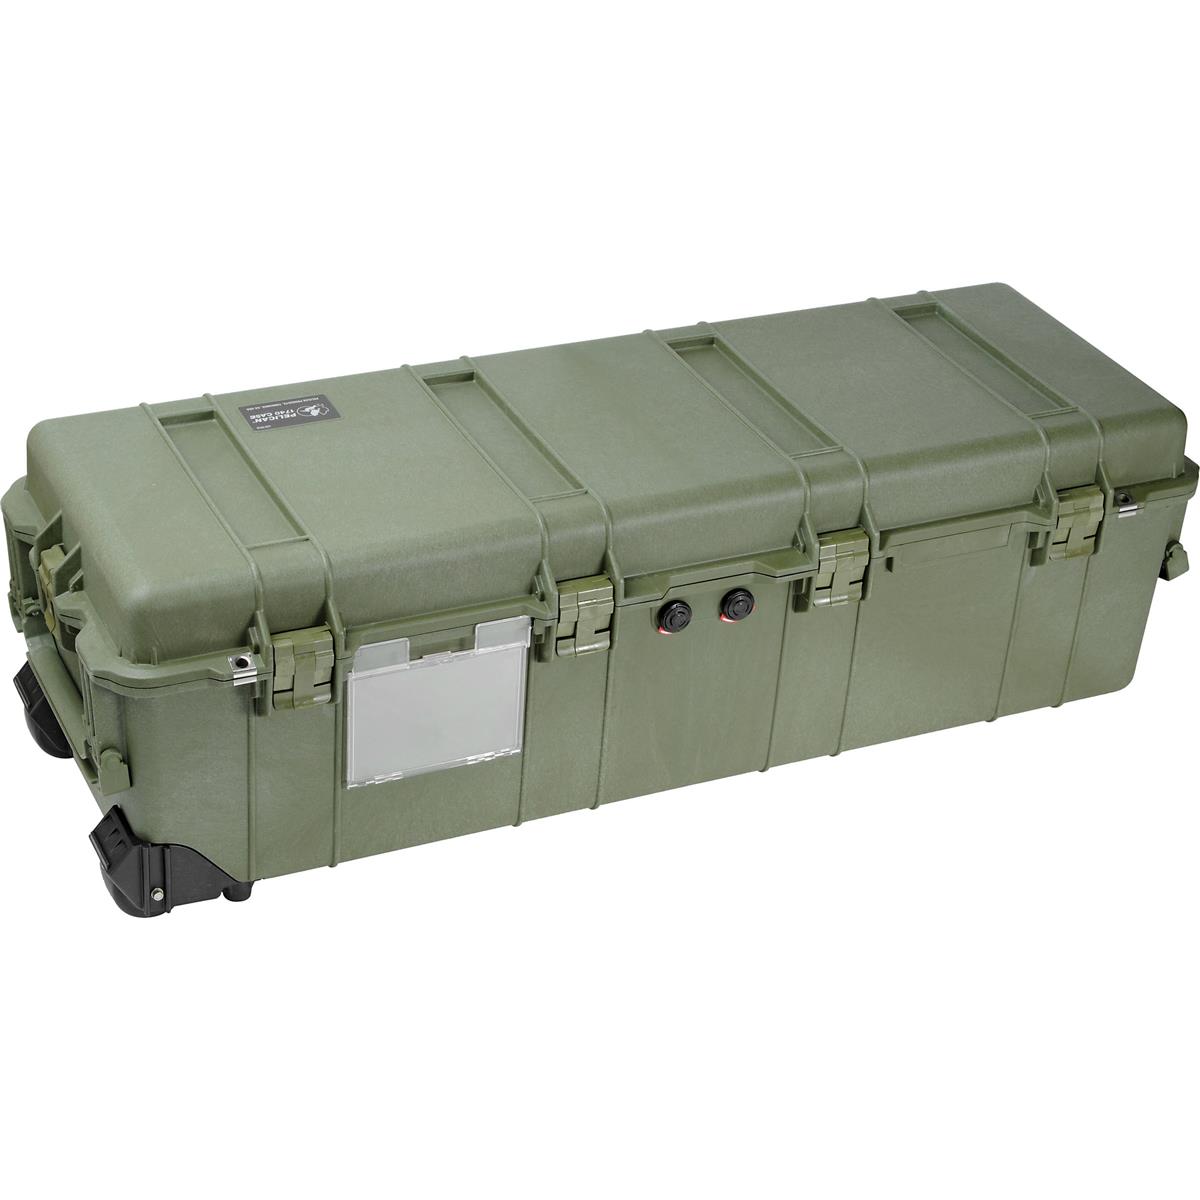 Pelican 1740 Transport Long Case without Foam, Olive Drab Green -  1740-001-130